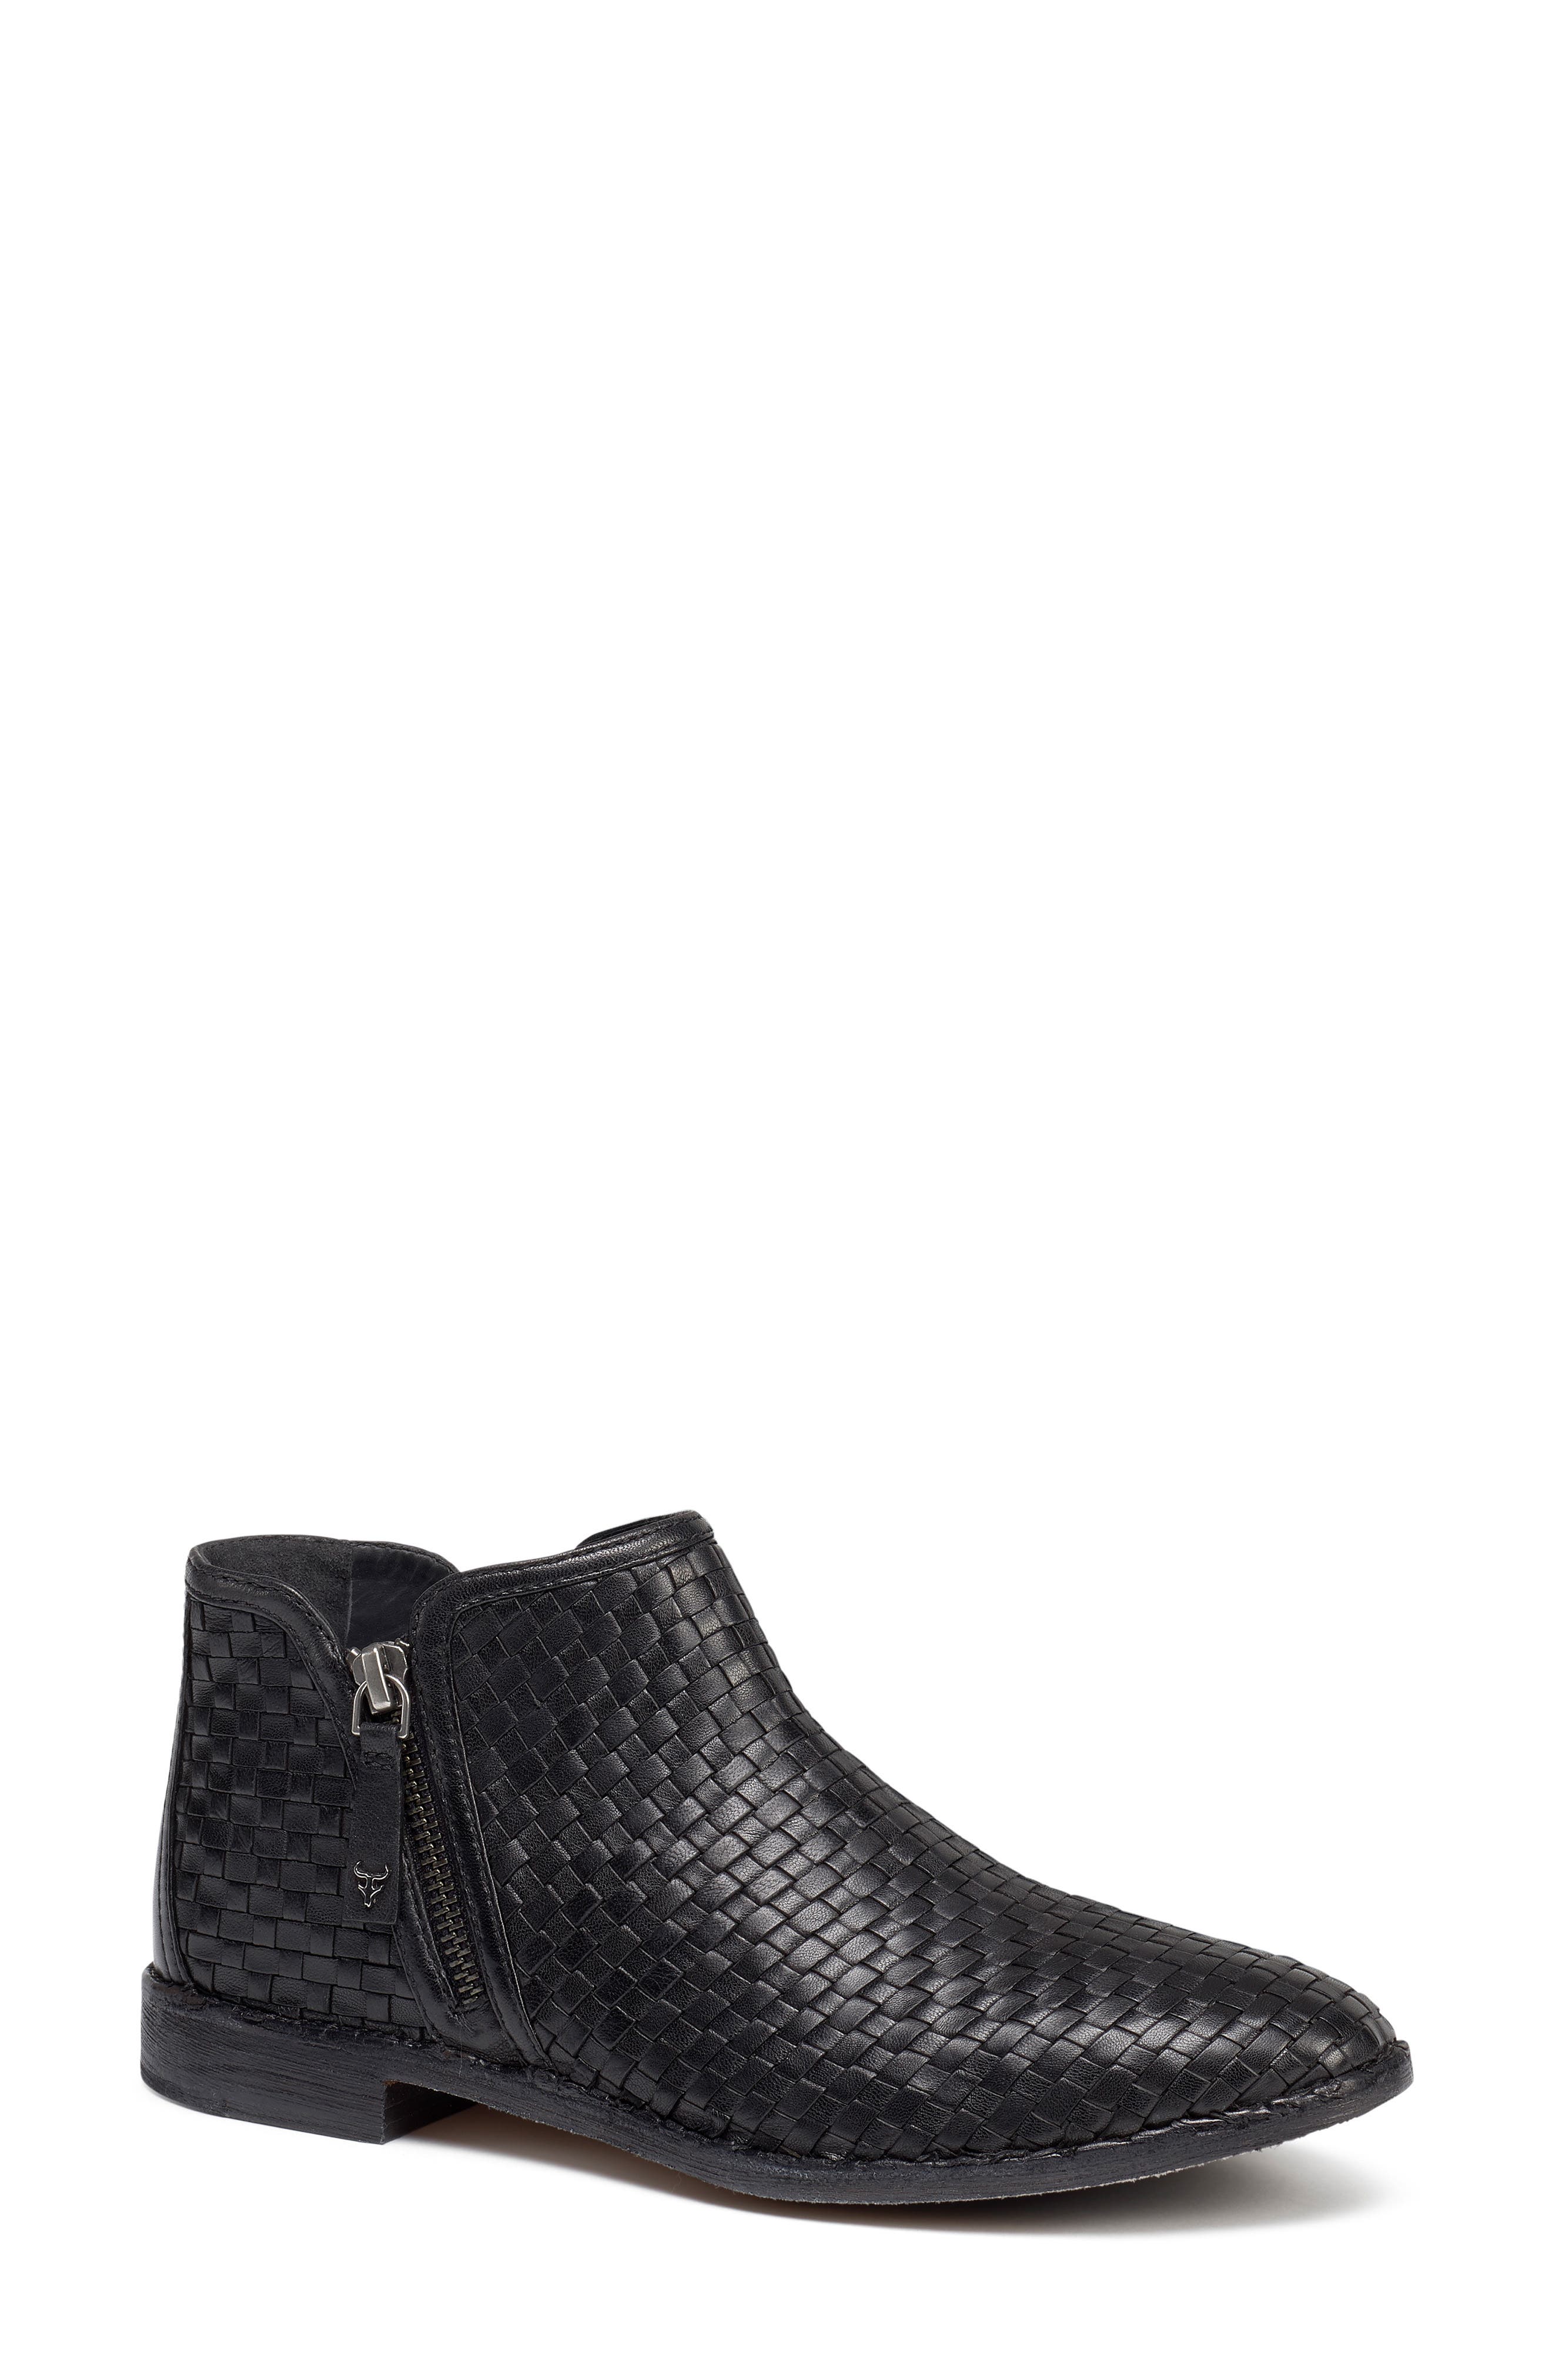 Women's Trask Boots | Nordstrom